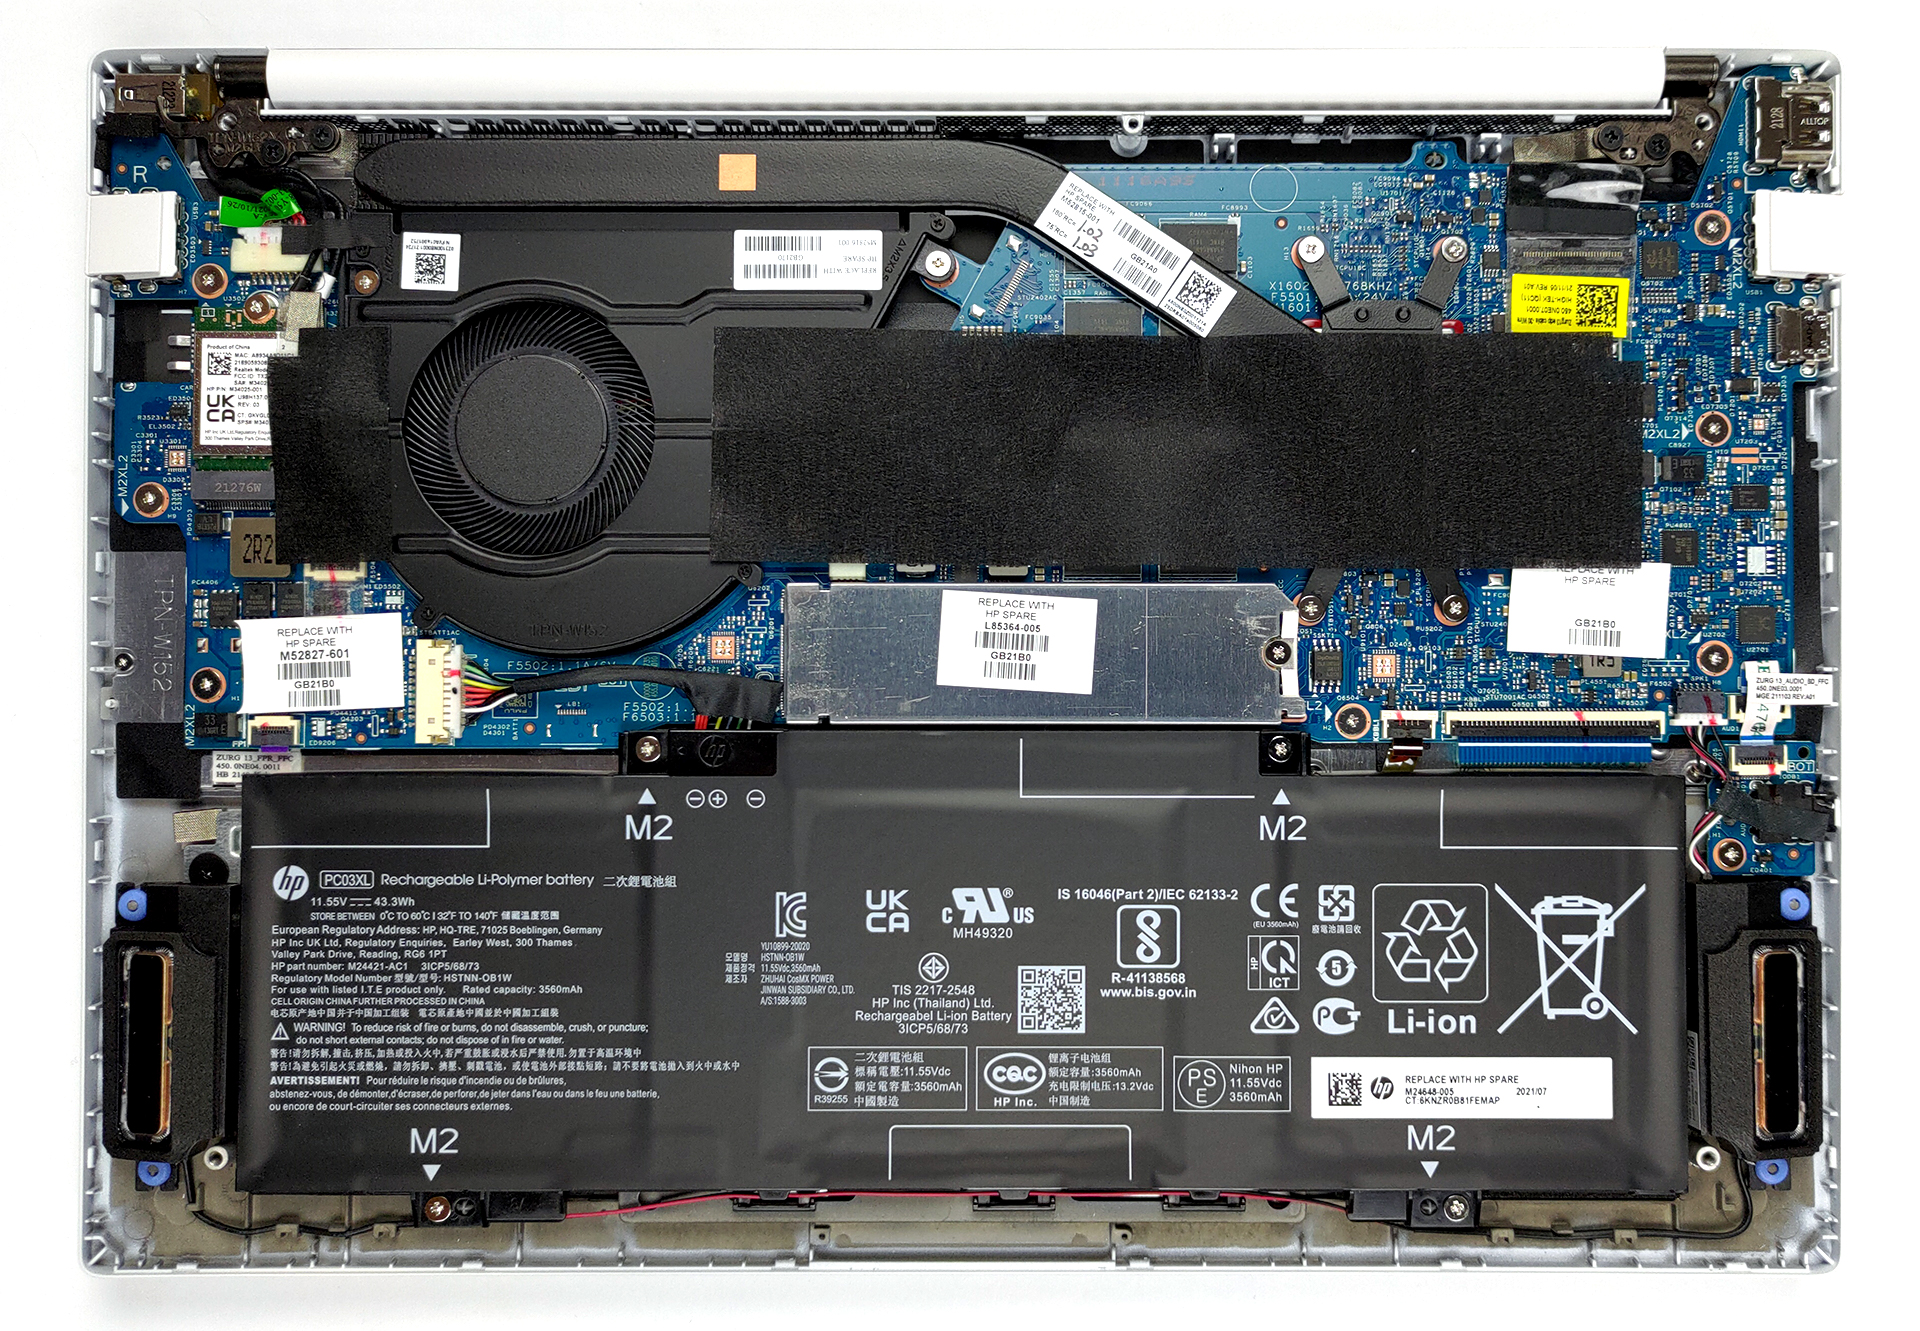 HP Pavilion Aero 13 (13-be0000, be1000, be2000) - Specs, Tests